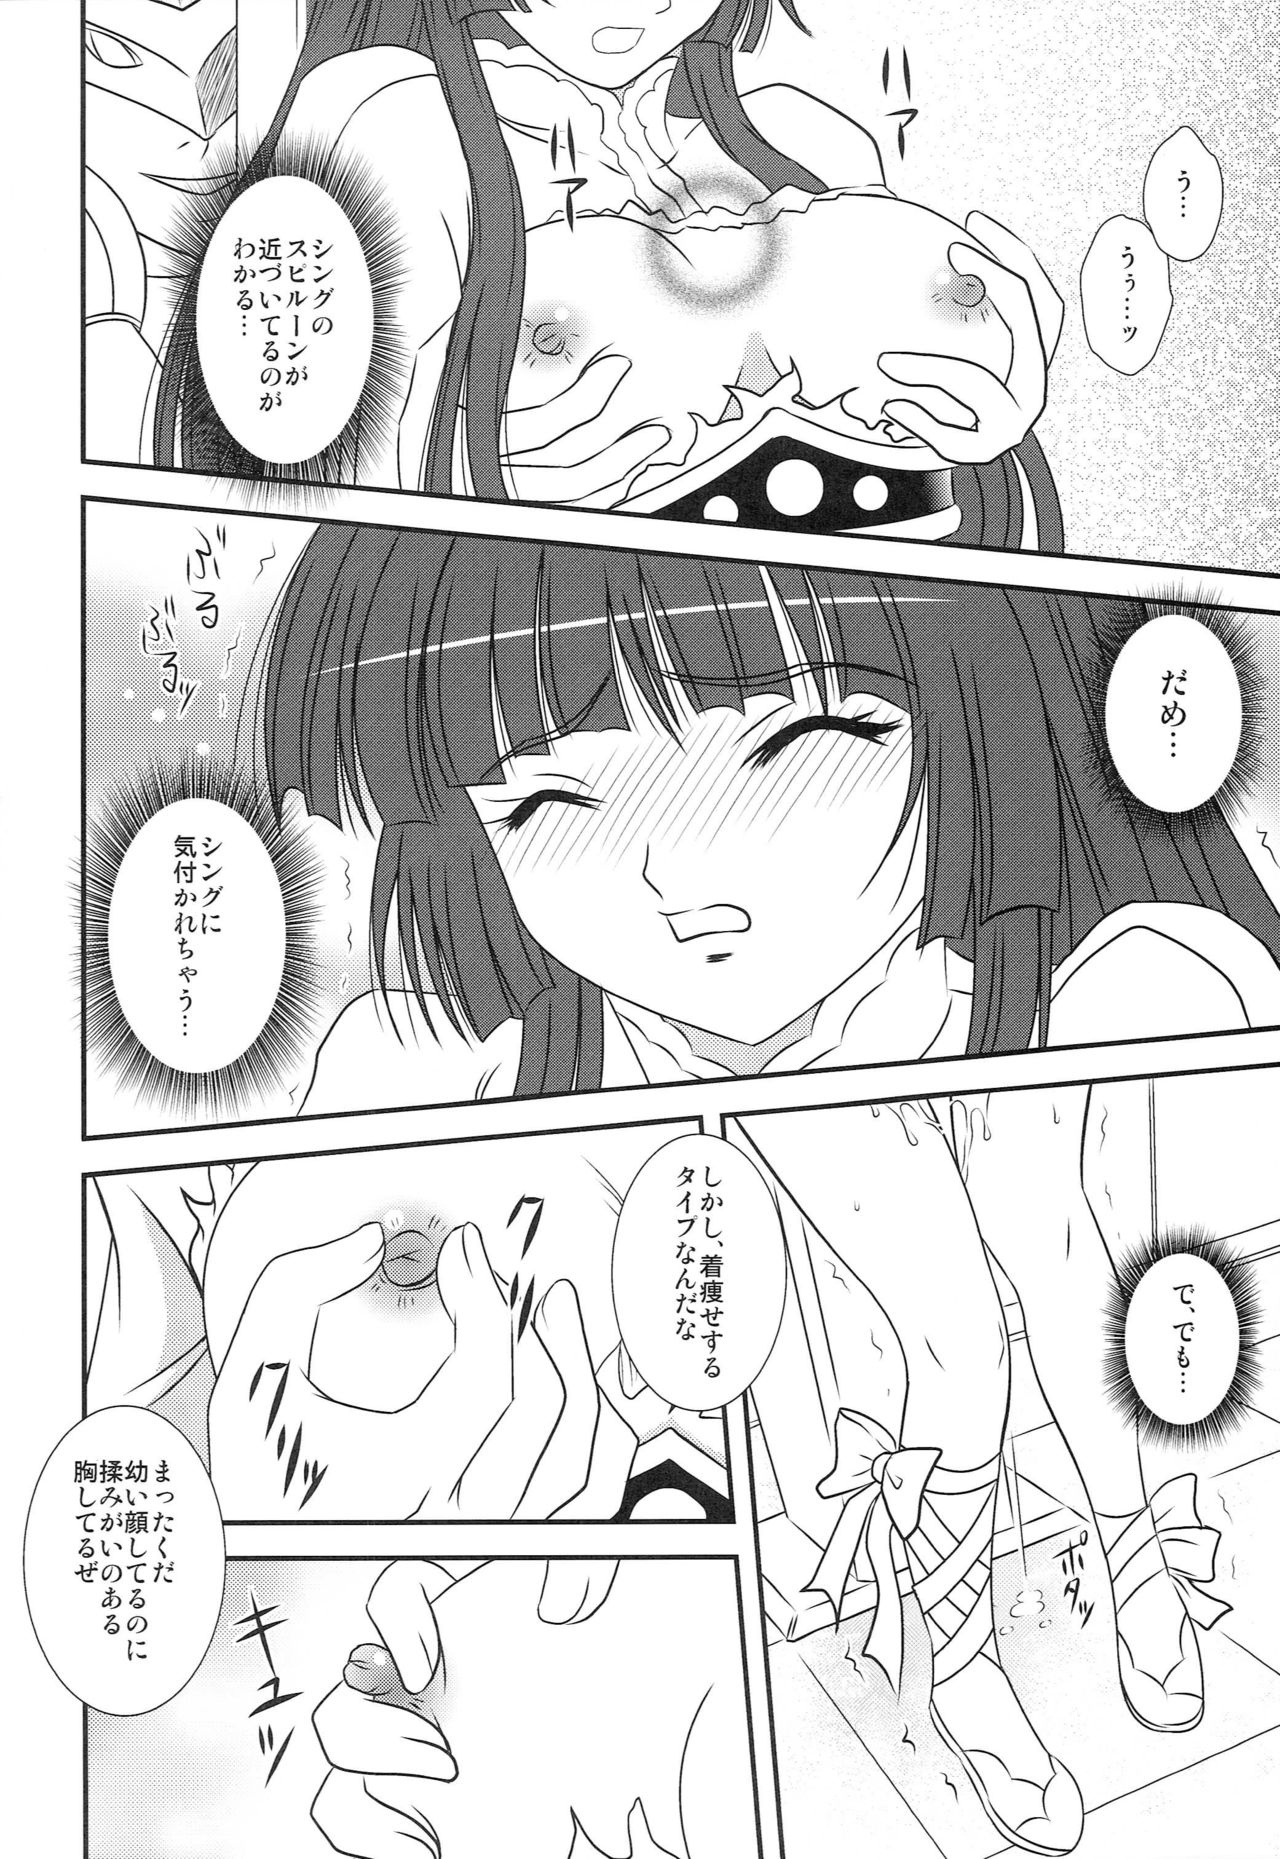 (COMIC1☆3) [PIECES (Hidaka Ryou)] Brave Heart (Tales of Hearts) page 11 full